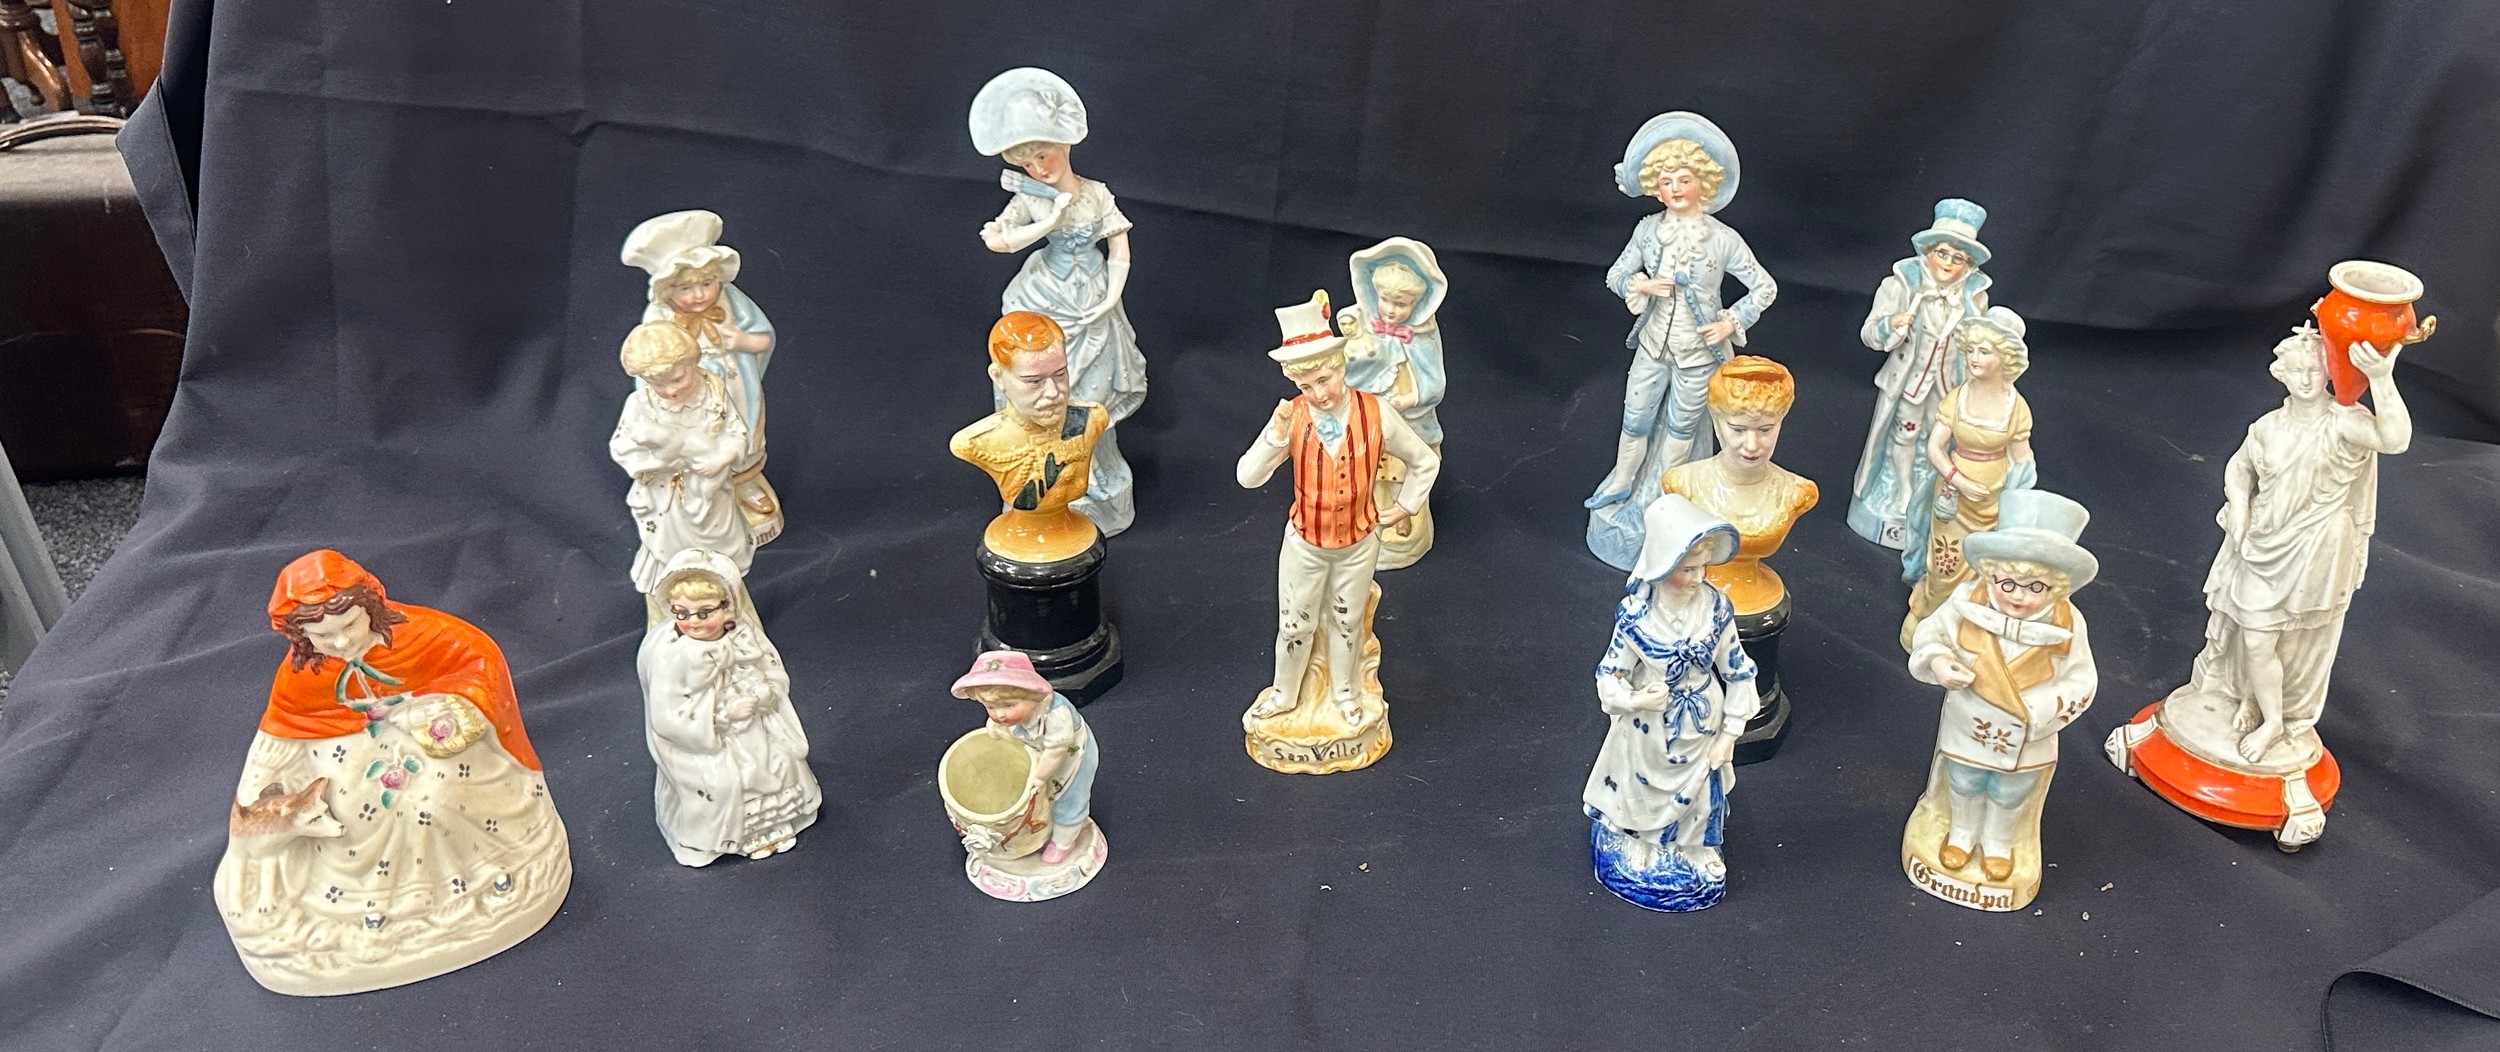 Quantity of antique bisque German figures tallest measures approx 10 inches